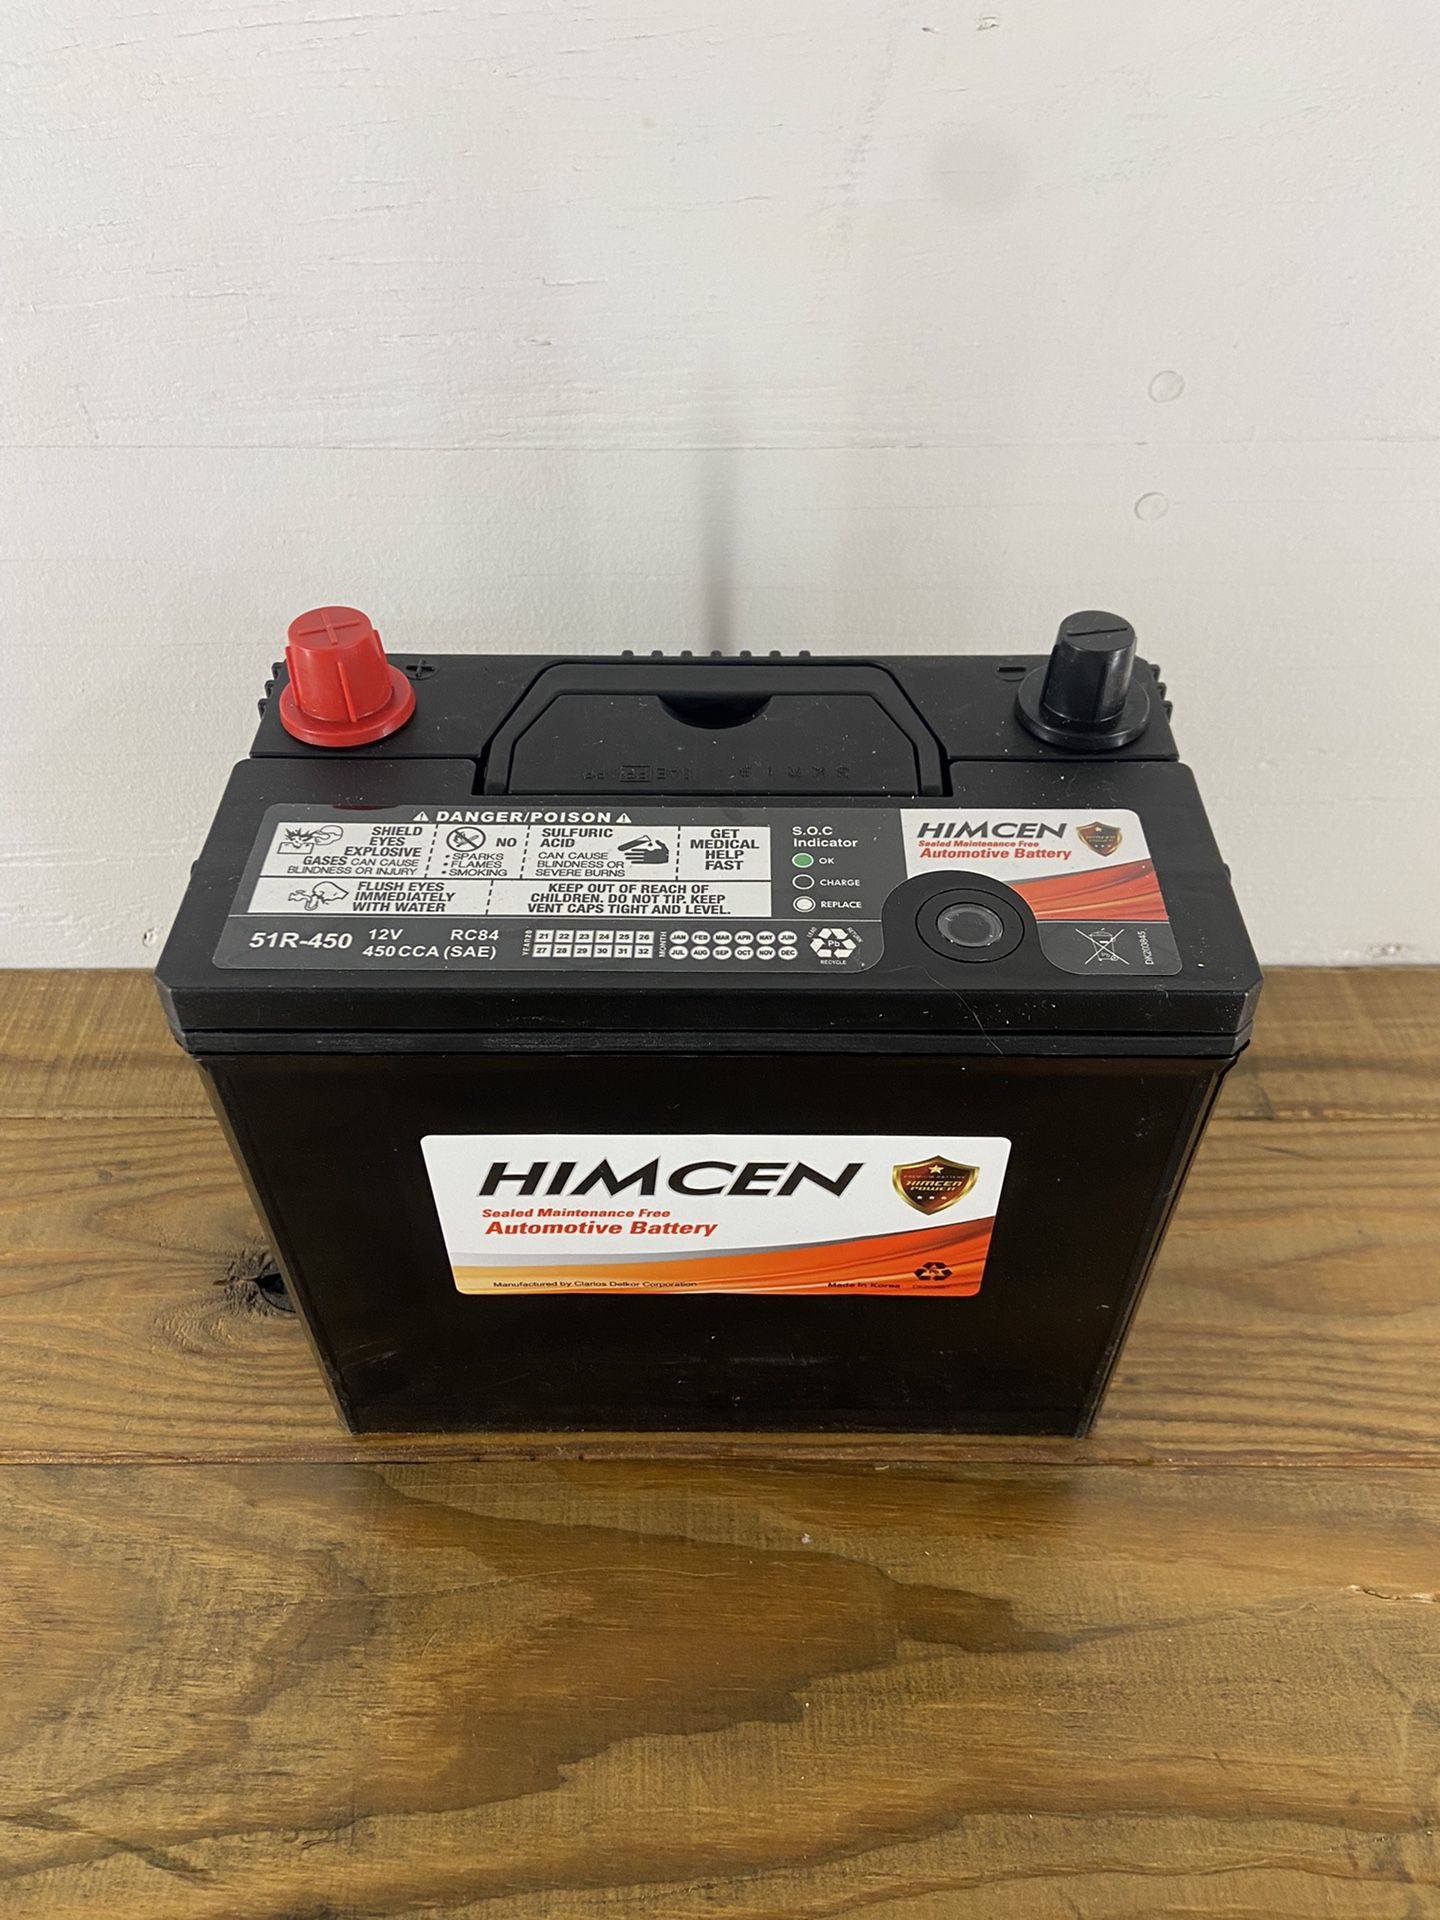 New Car Battery Group Size 51R - $120